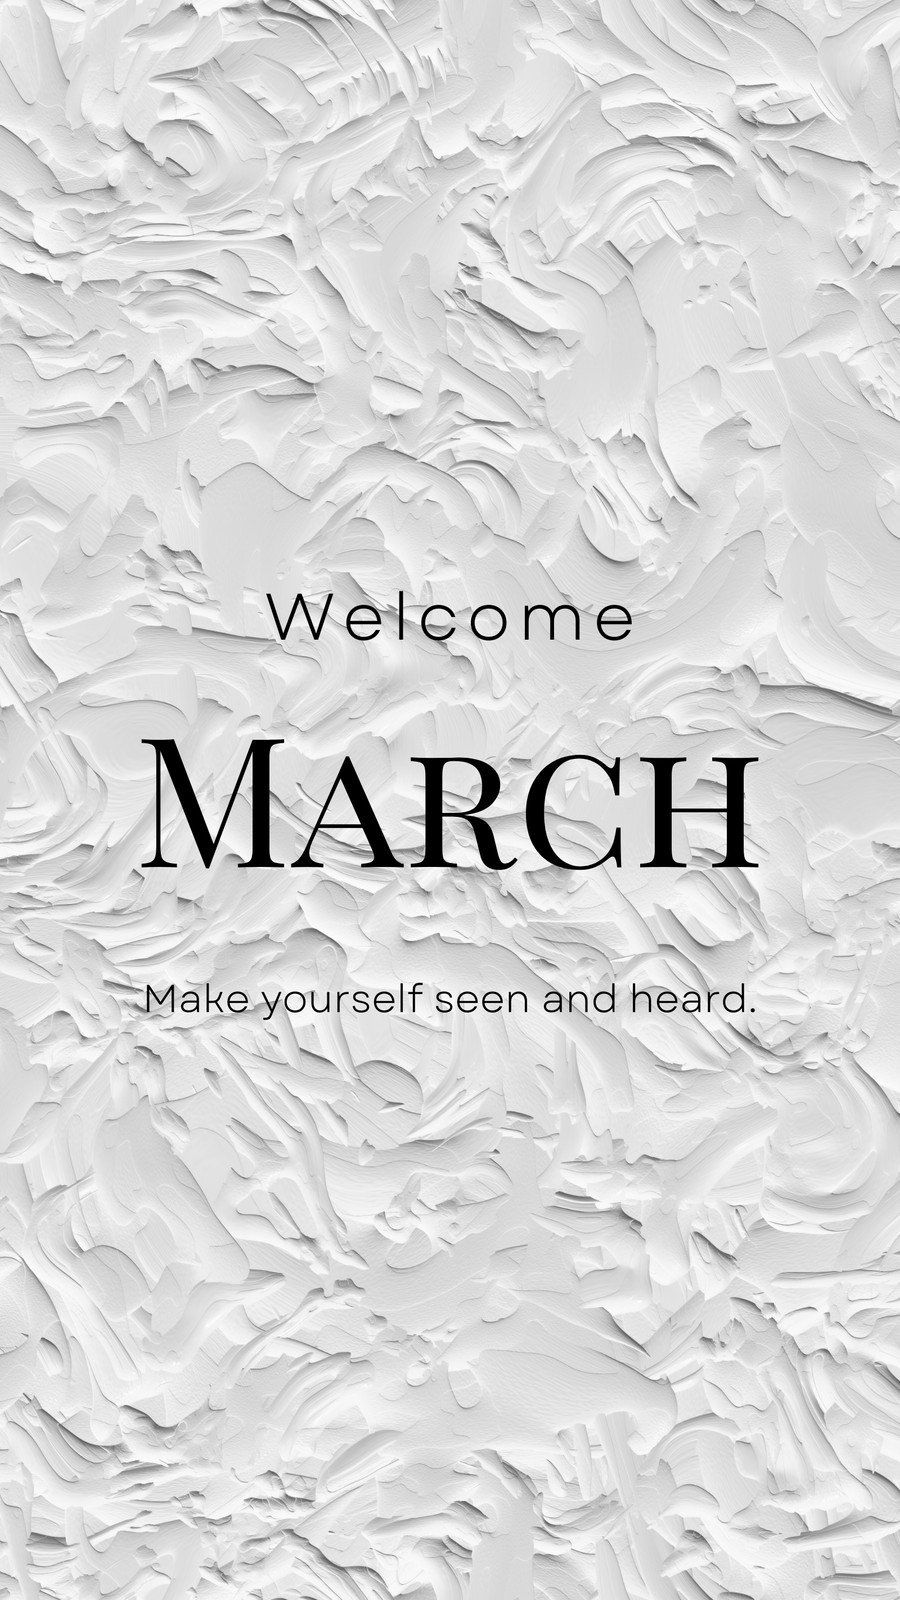 Welcome March wallpaper. Make yourself seen and heard. - Silver, March